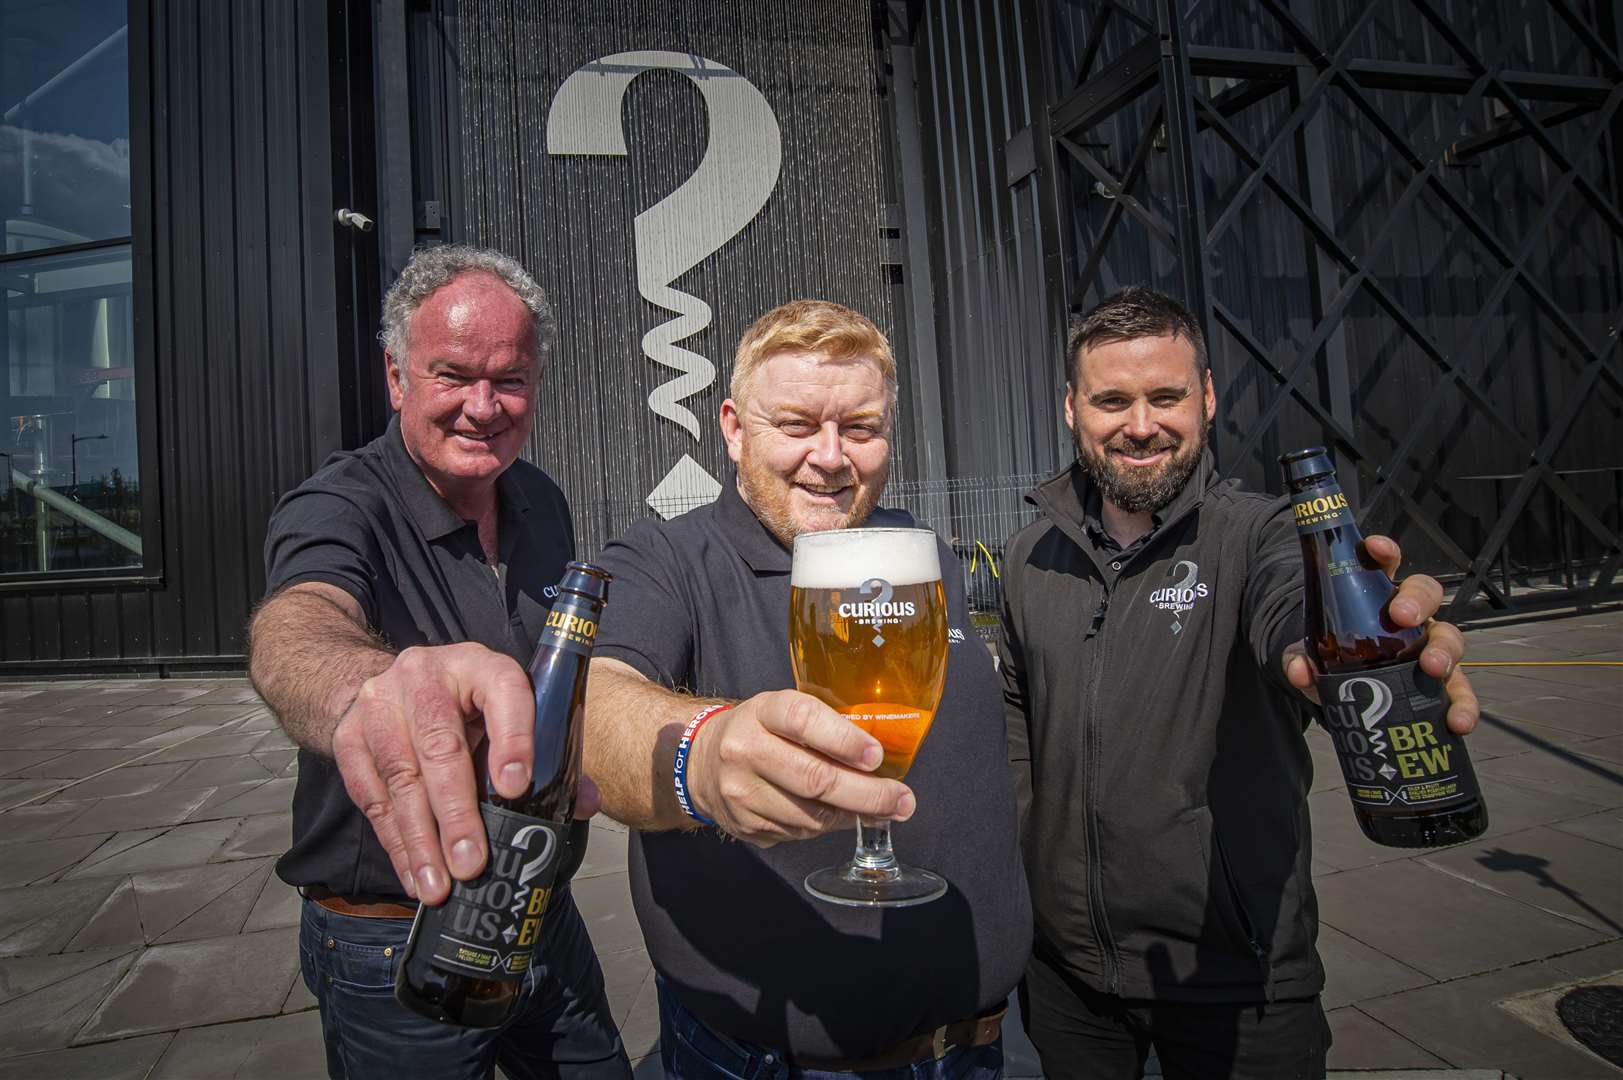 Mark Crowther, Simon George and Matt Anderson are excited to be heading the Curious Brewery